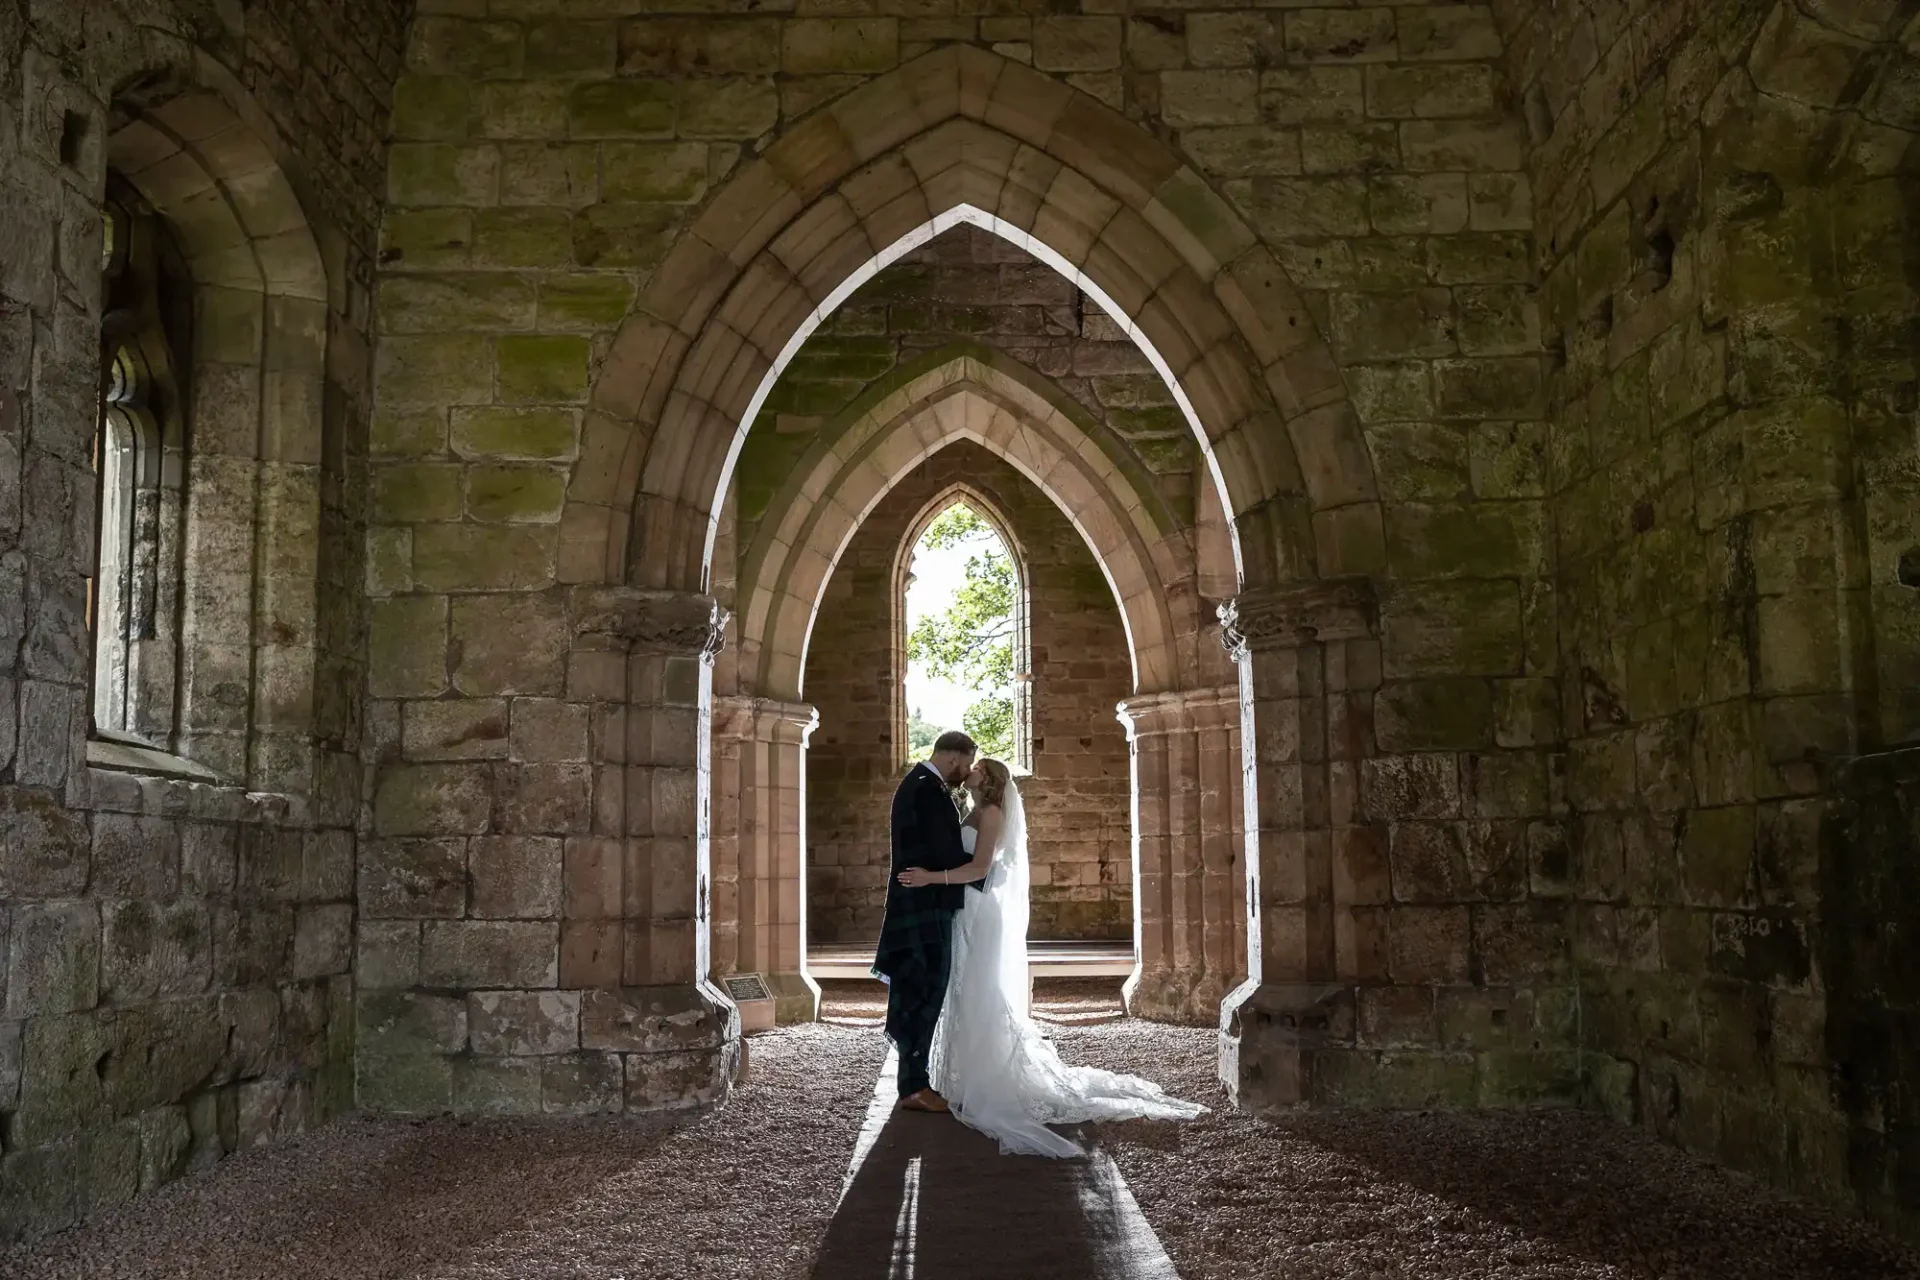 A bride and groom share an embrace under the arches of a stone church ruin, with trees visible in the background.